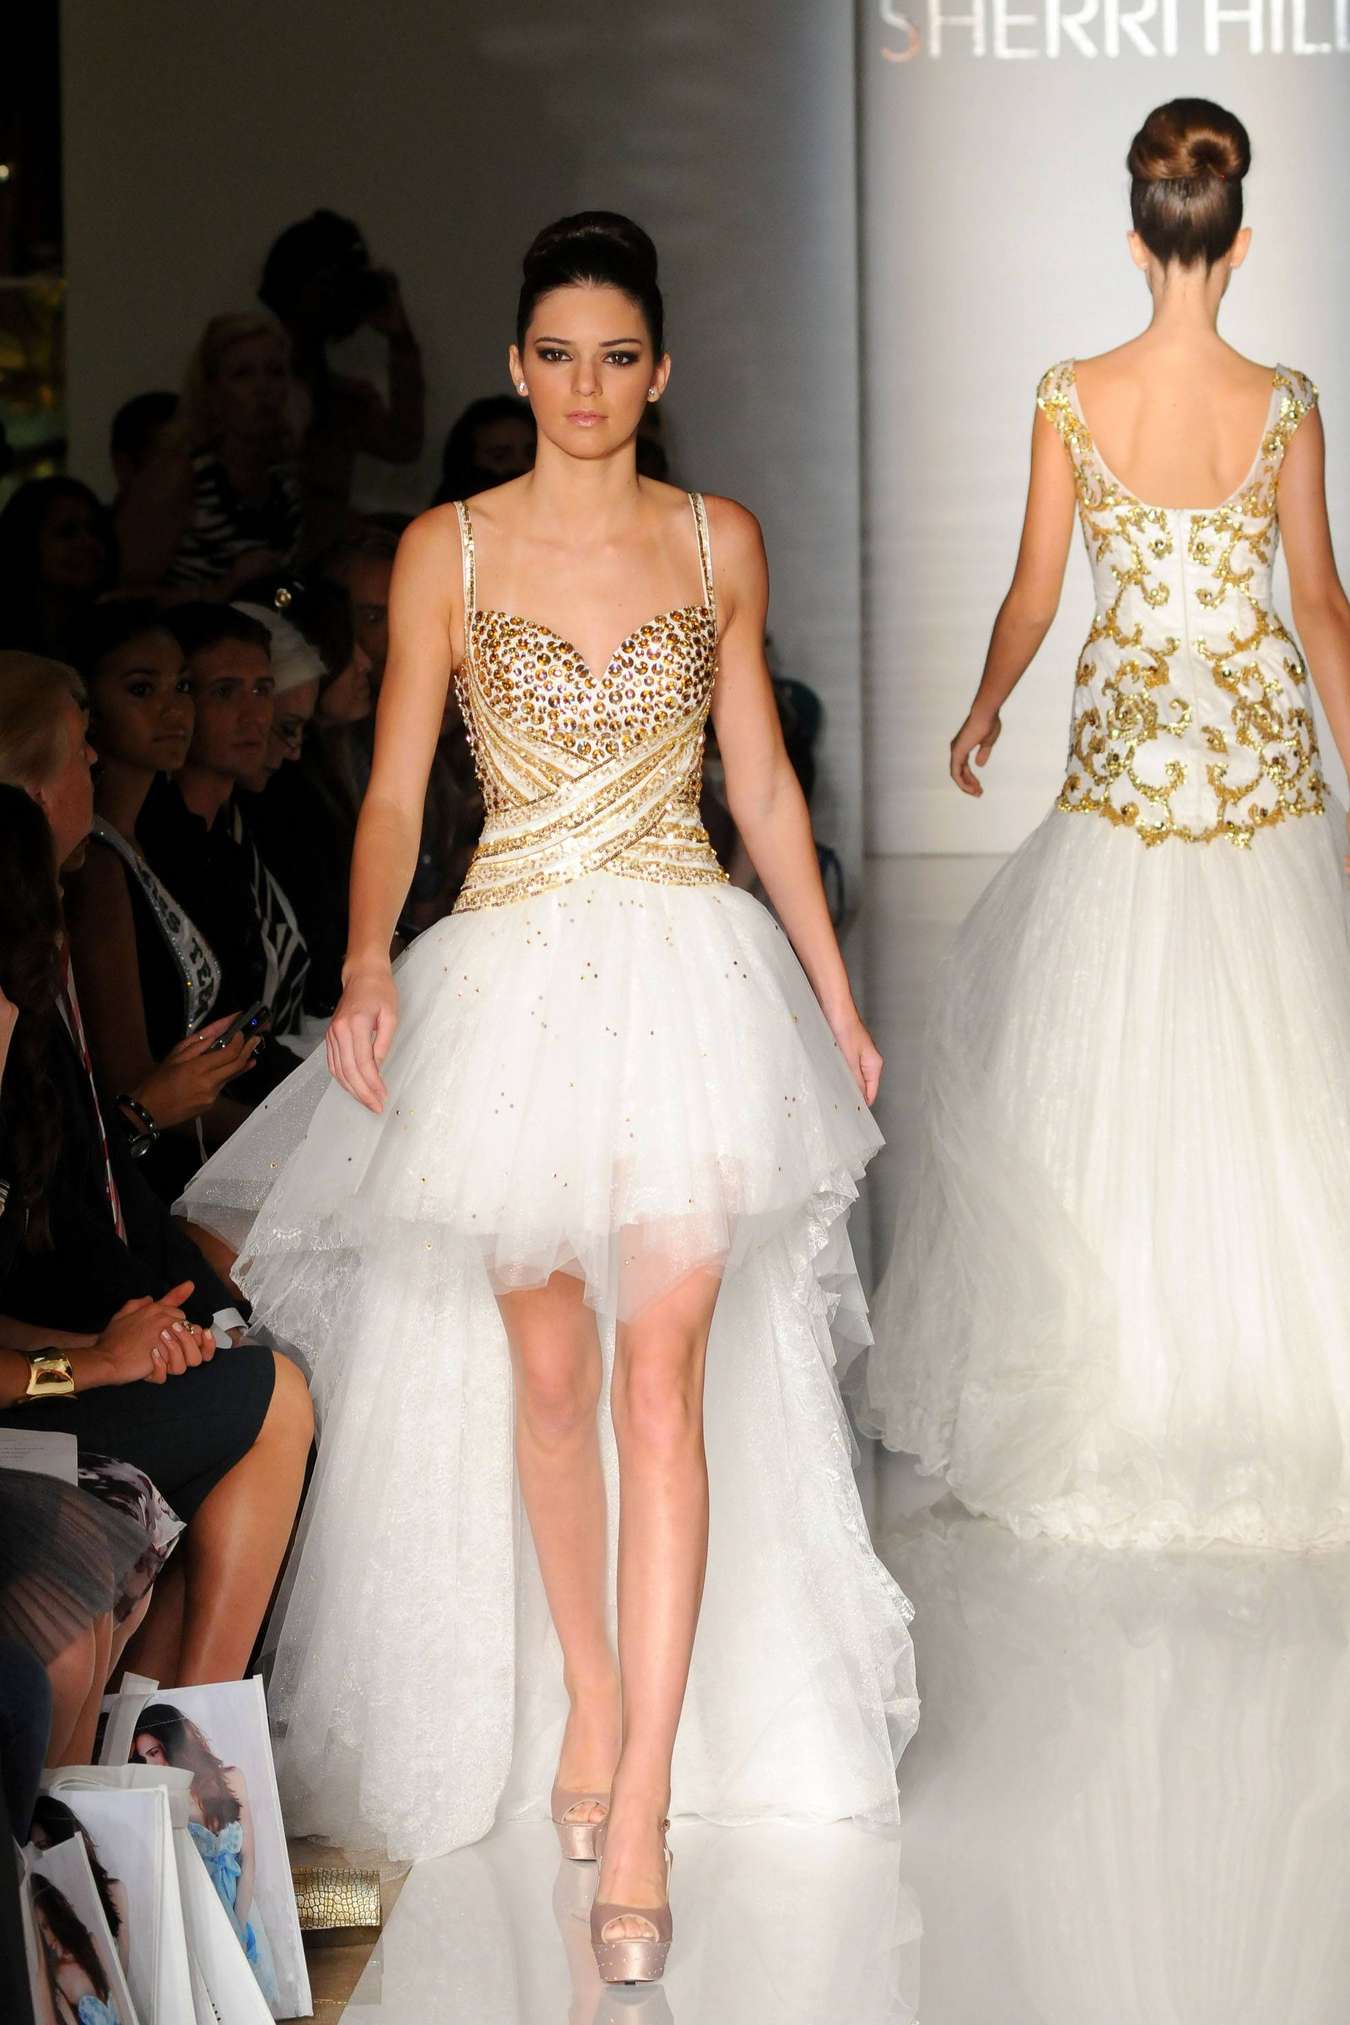 Kendall Jenner - 2012 Sherri Hill Spring Fashion Show in NY